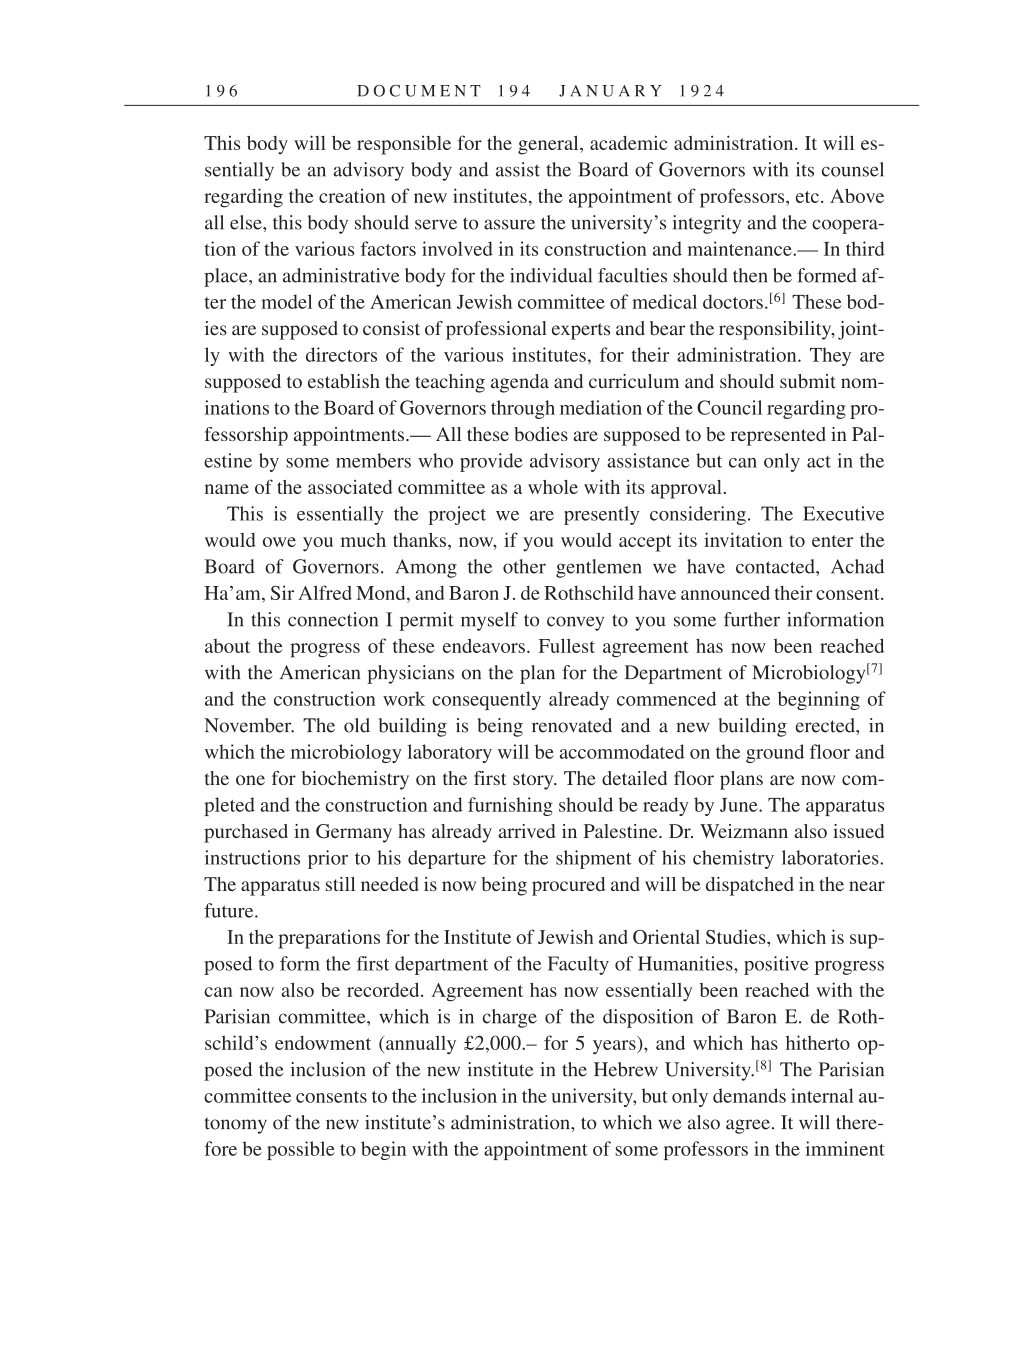 Volume 14: The Berlin Years: Writings & Correspondence, April 1923-May 1925 (English Translation Supplement) page 196